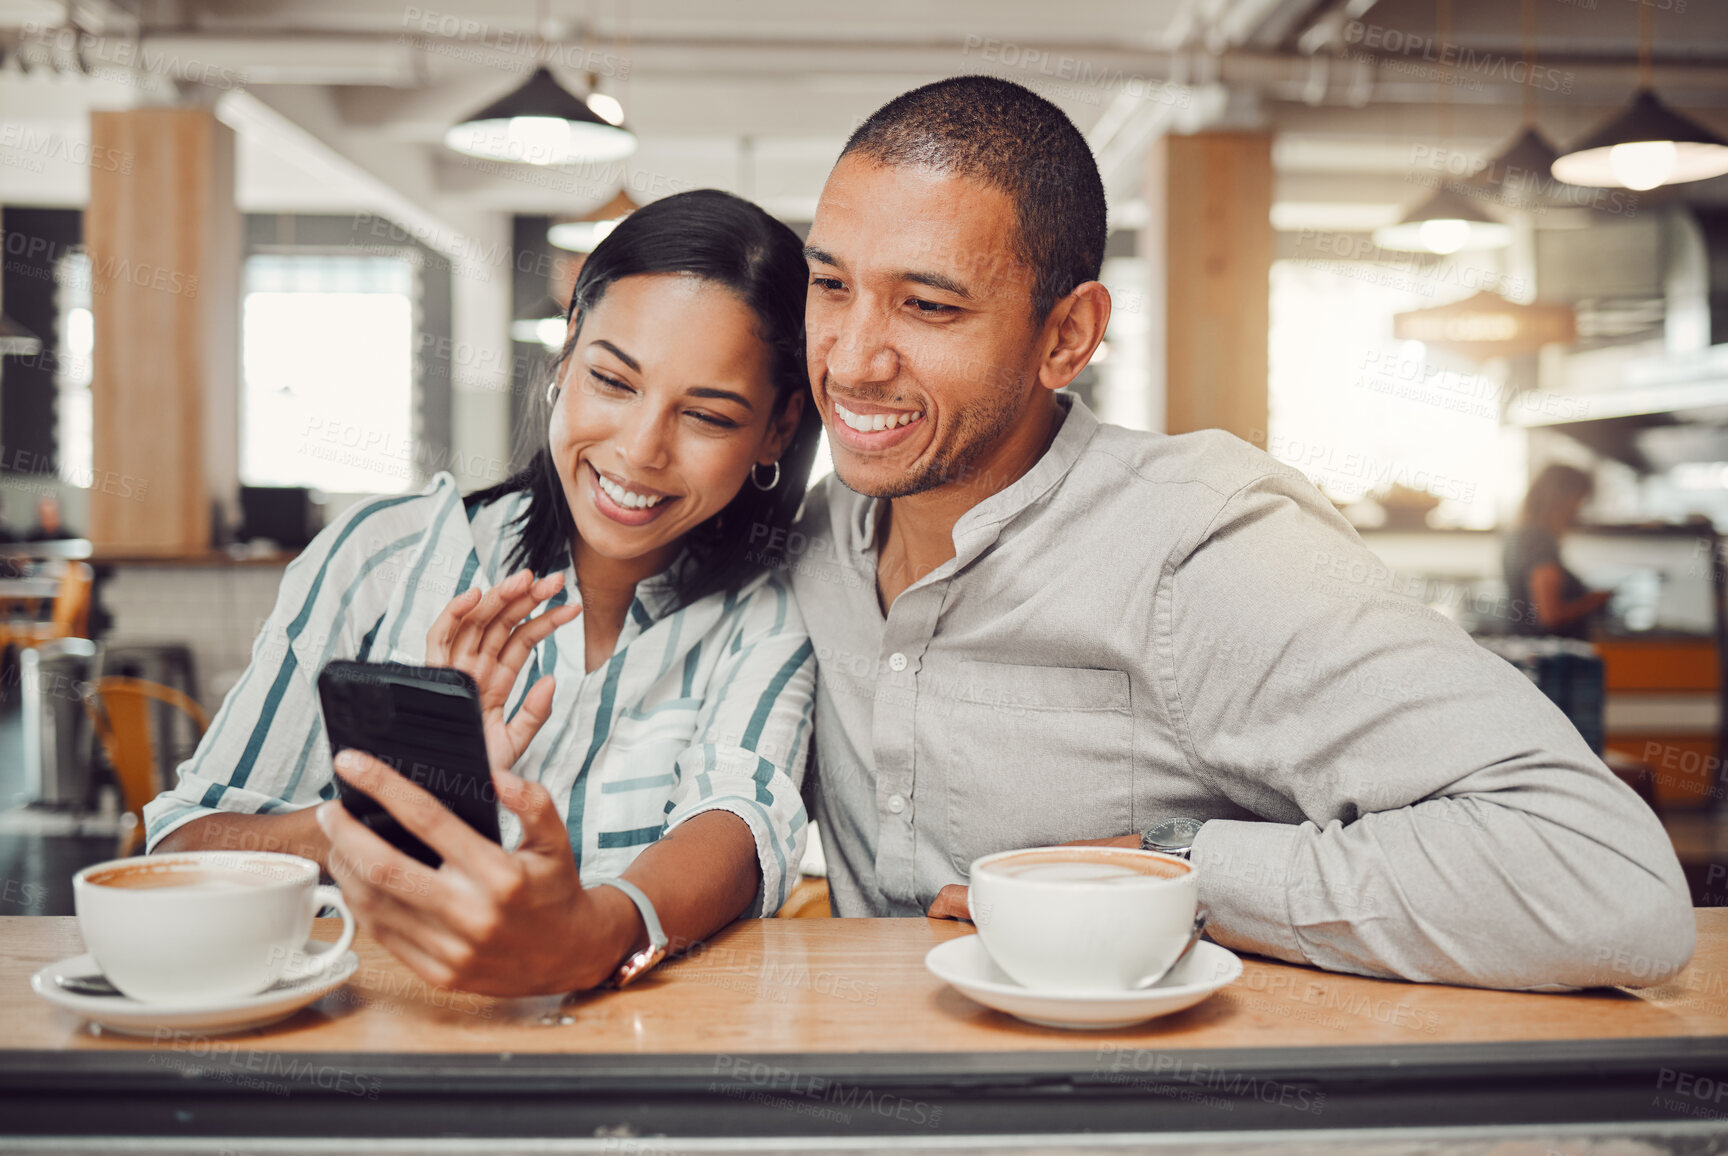 Buy stock photo Happy young mixed race couple sitting at table having coffee while looking at something on smartphone in cafe. Loving couple smiling while taking selfie or doing video call on mobile phone while on a date